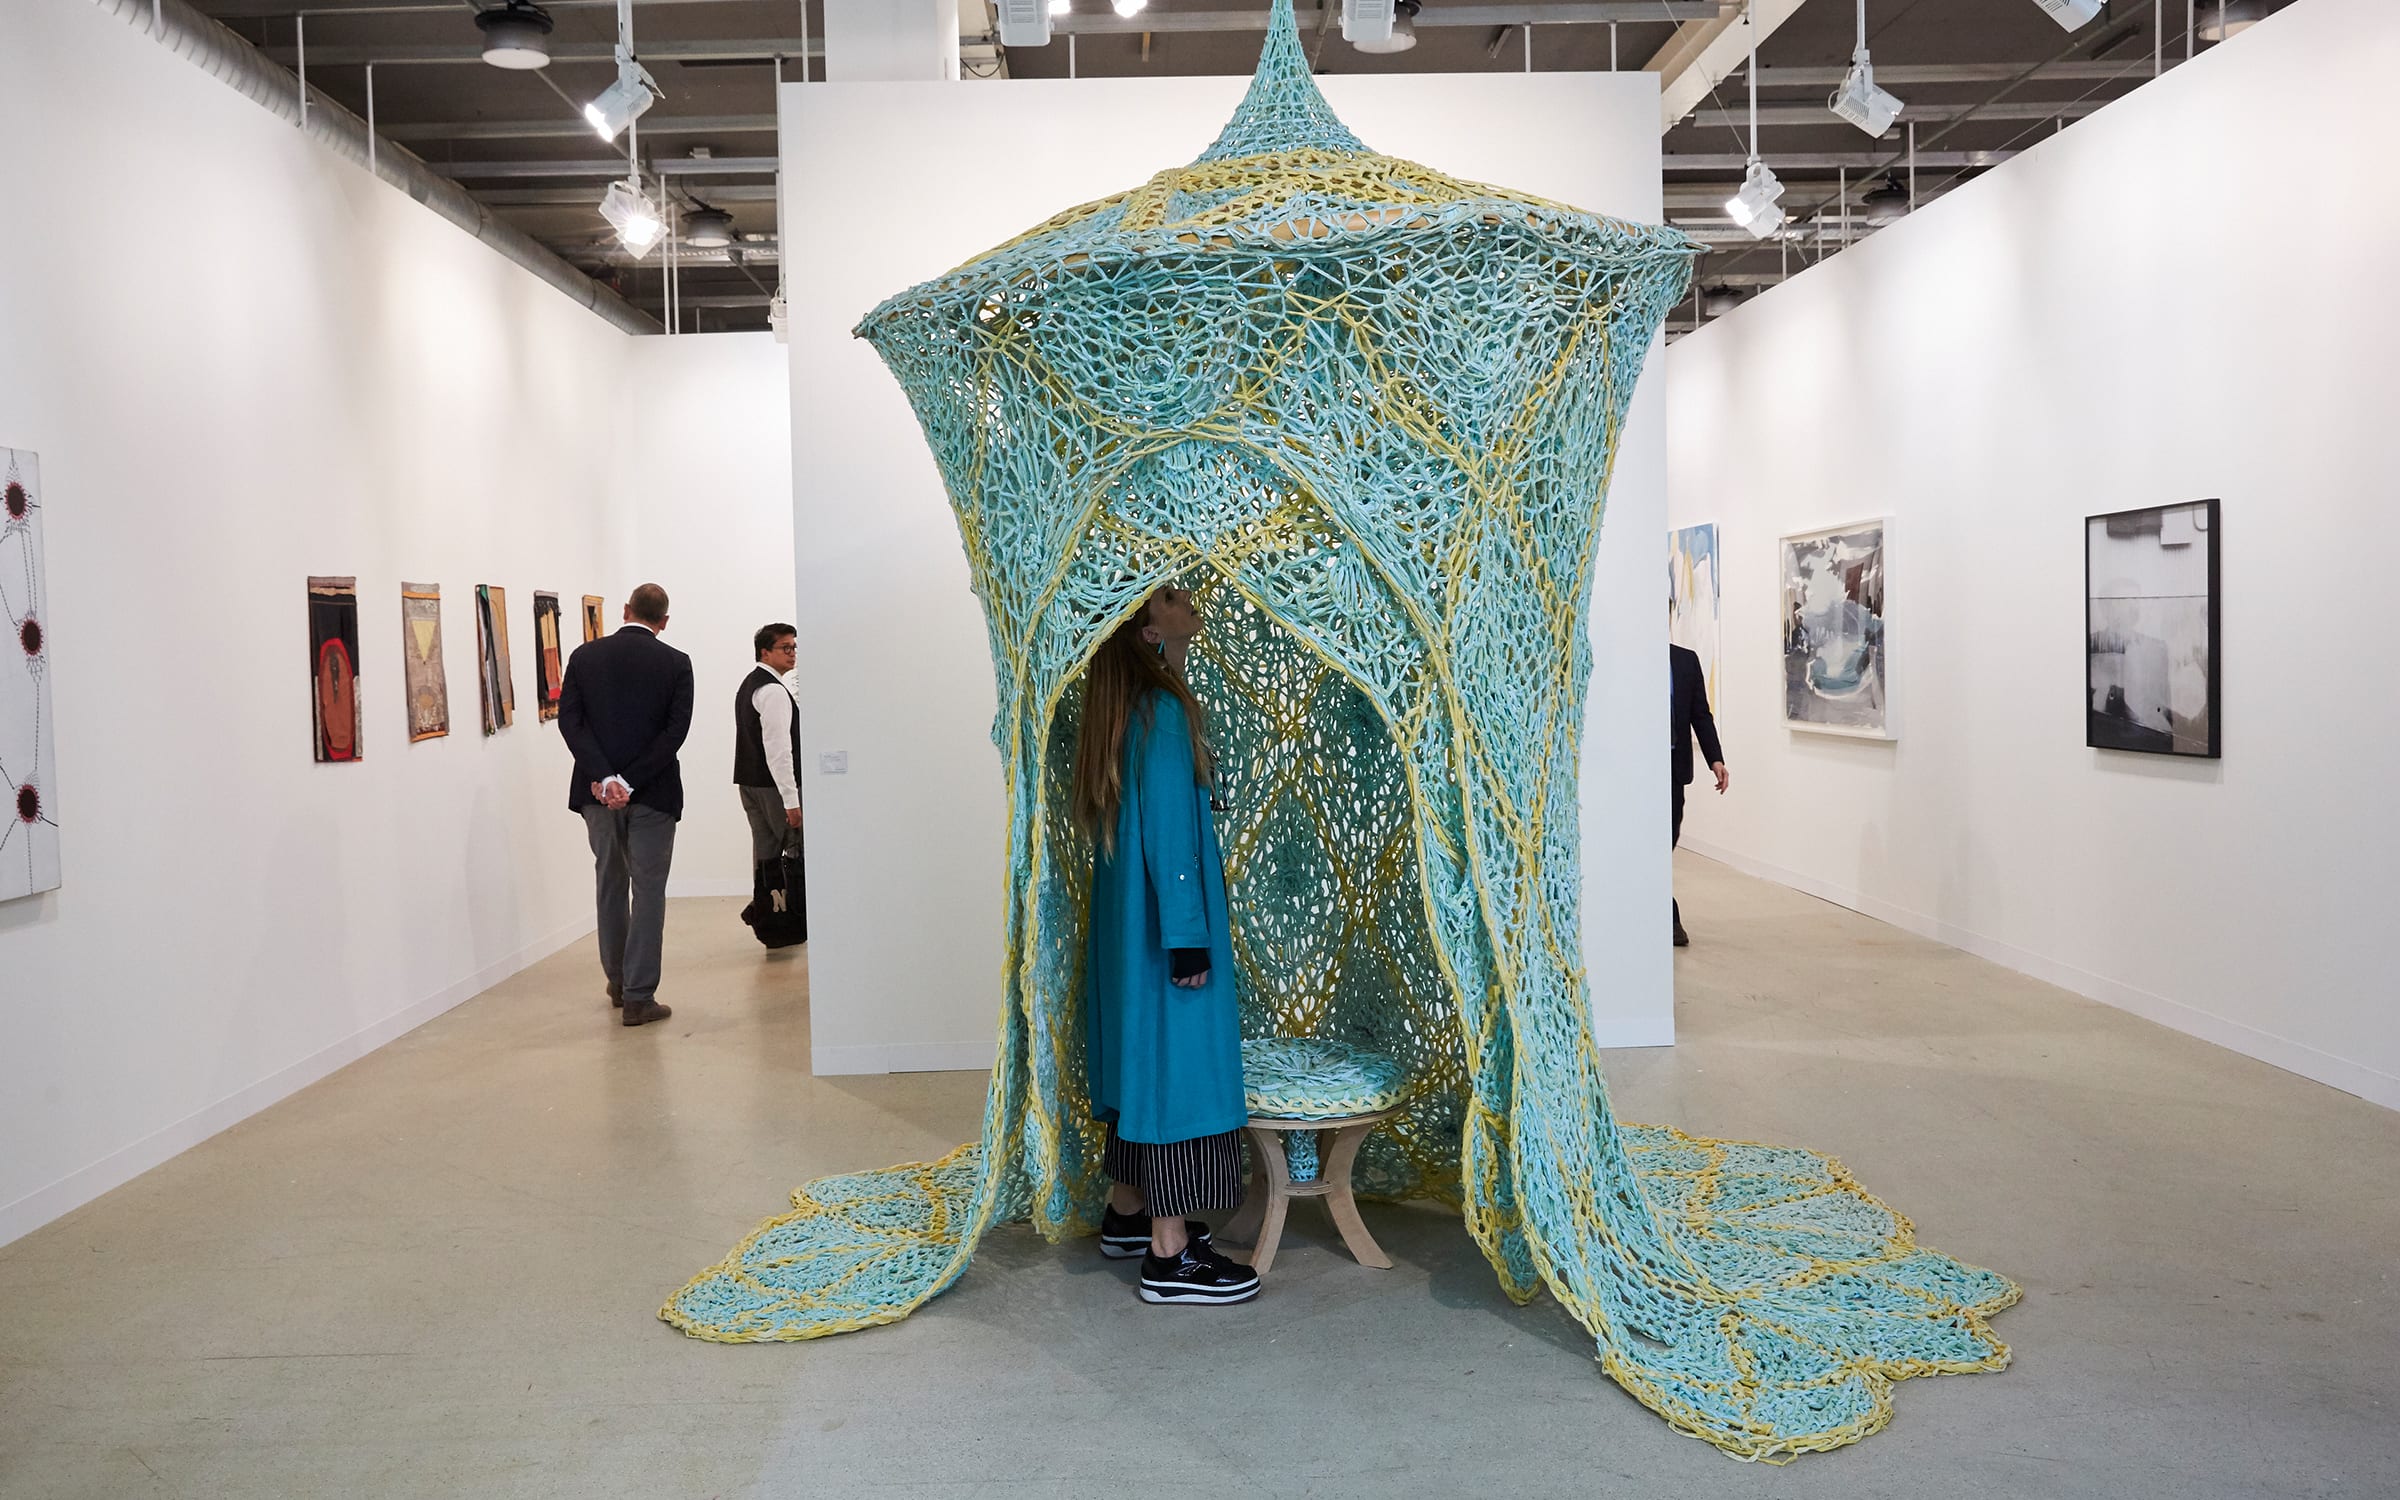 Installation view of a work by Ernesto Neto in Fortes D'Aloia & Gabriel's booth at Art Basel in Basel, 2018.